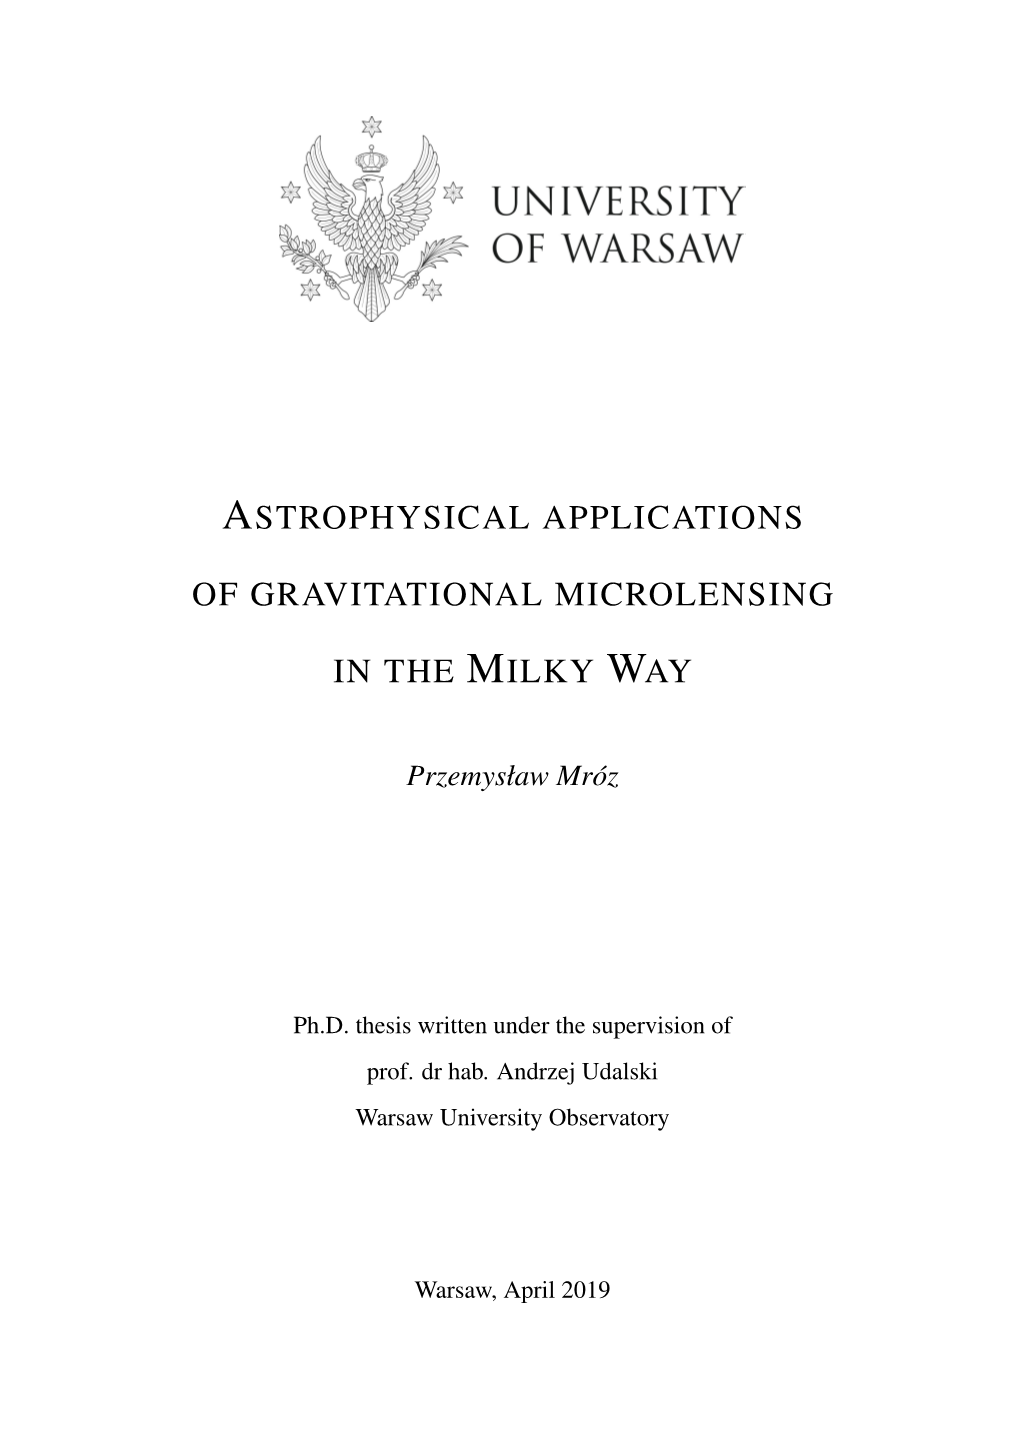 Astrophysical Applications of Gravitational Microlensing in the Milky